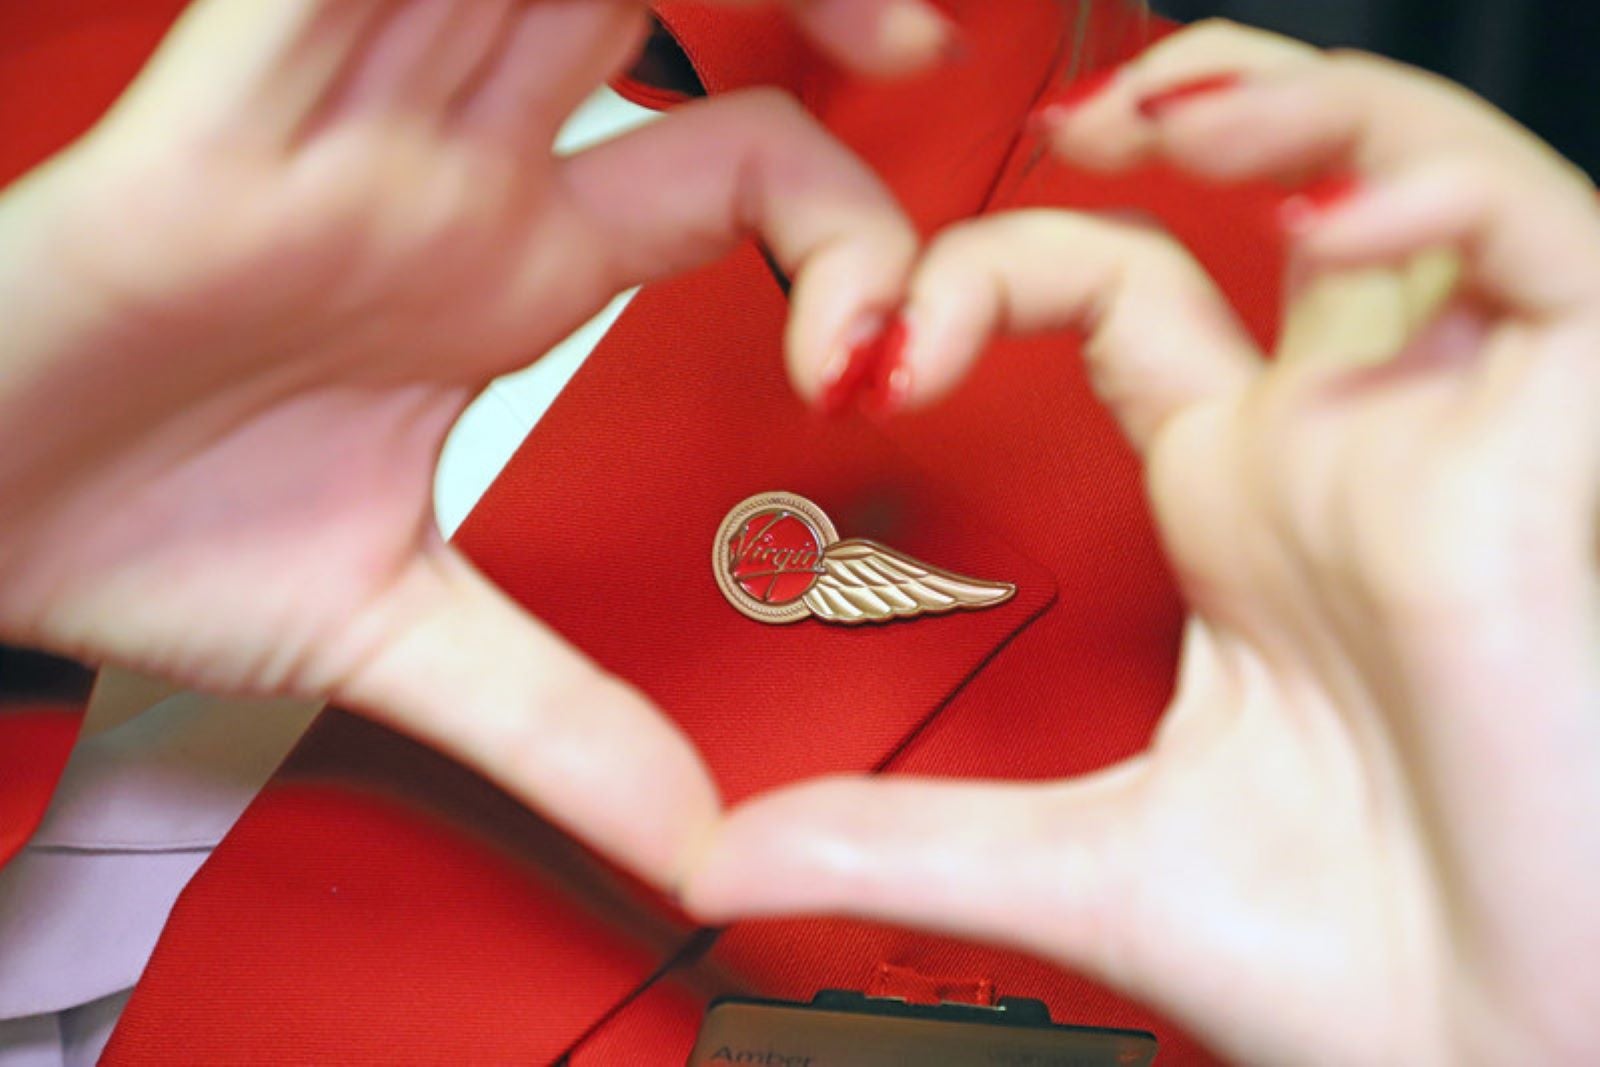 Virgin Atlantic - Badge with heart - courtesy of the airline